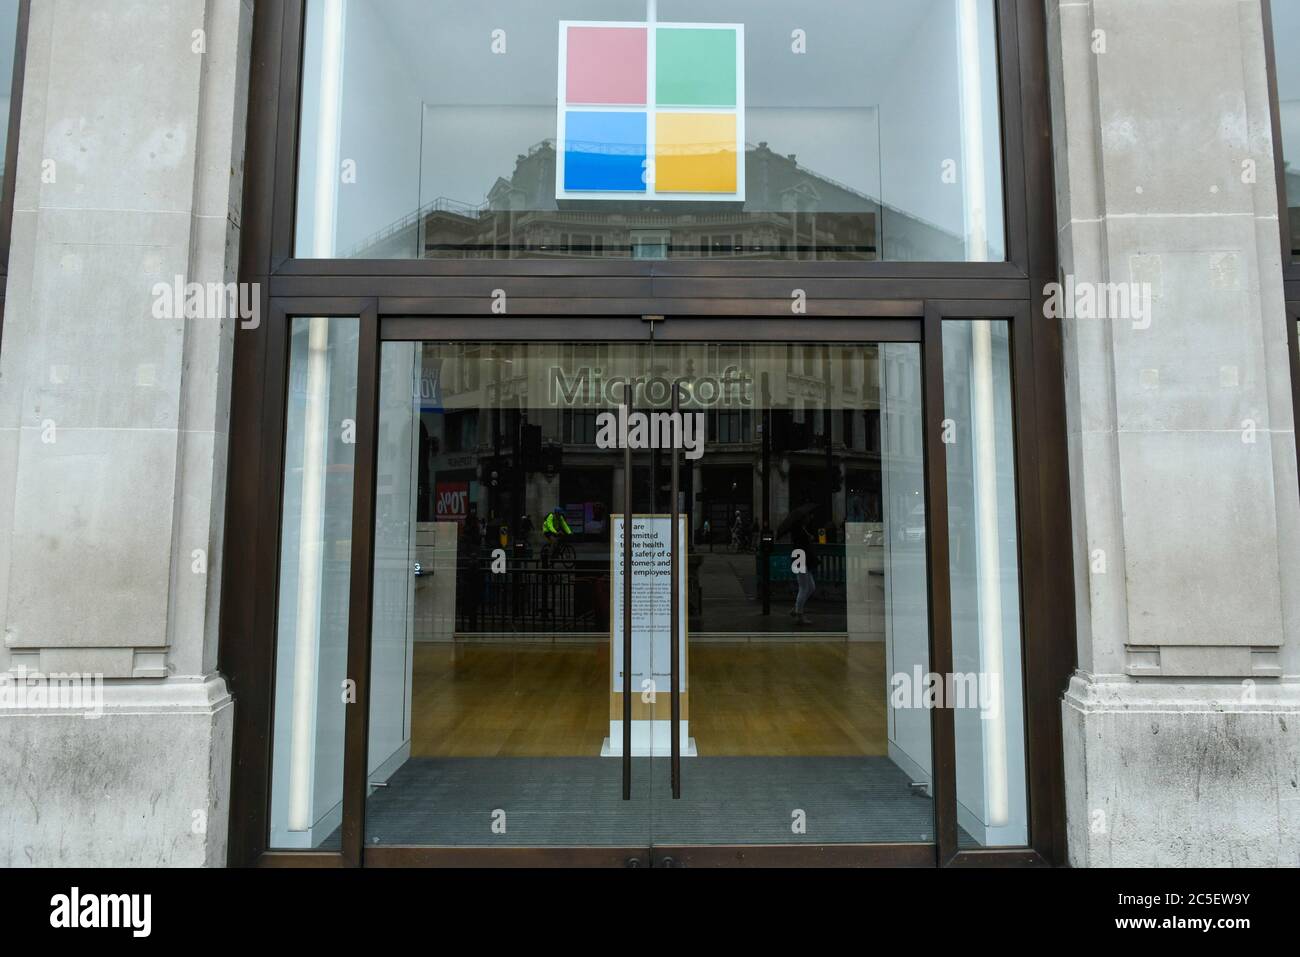 London, UK.  2 July 2020.  Exterior of the Microsoft store at Oxford Circus.  Microsoft has announced that all physical store locations in the USA will close, retail staff members will move to serve customer from corporate offices at a cost of $450m.  Stores in international locations such as London will be 're-imagined' as places for customers. Credit: Stephen Chung / Alamy Live News Stock Photo